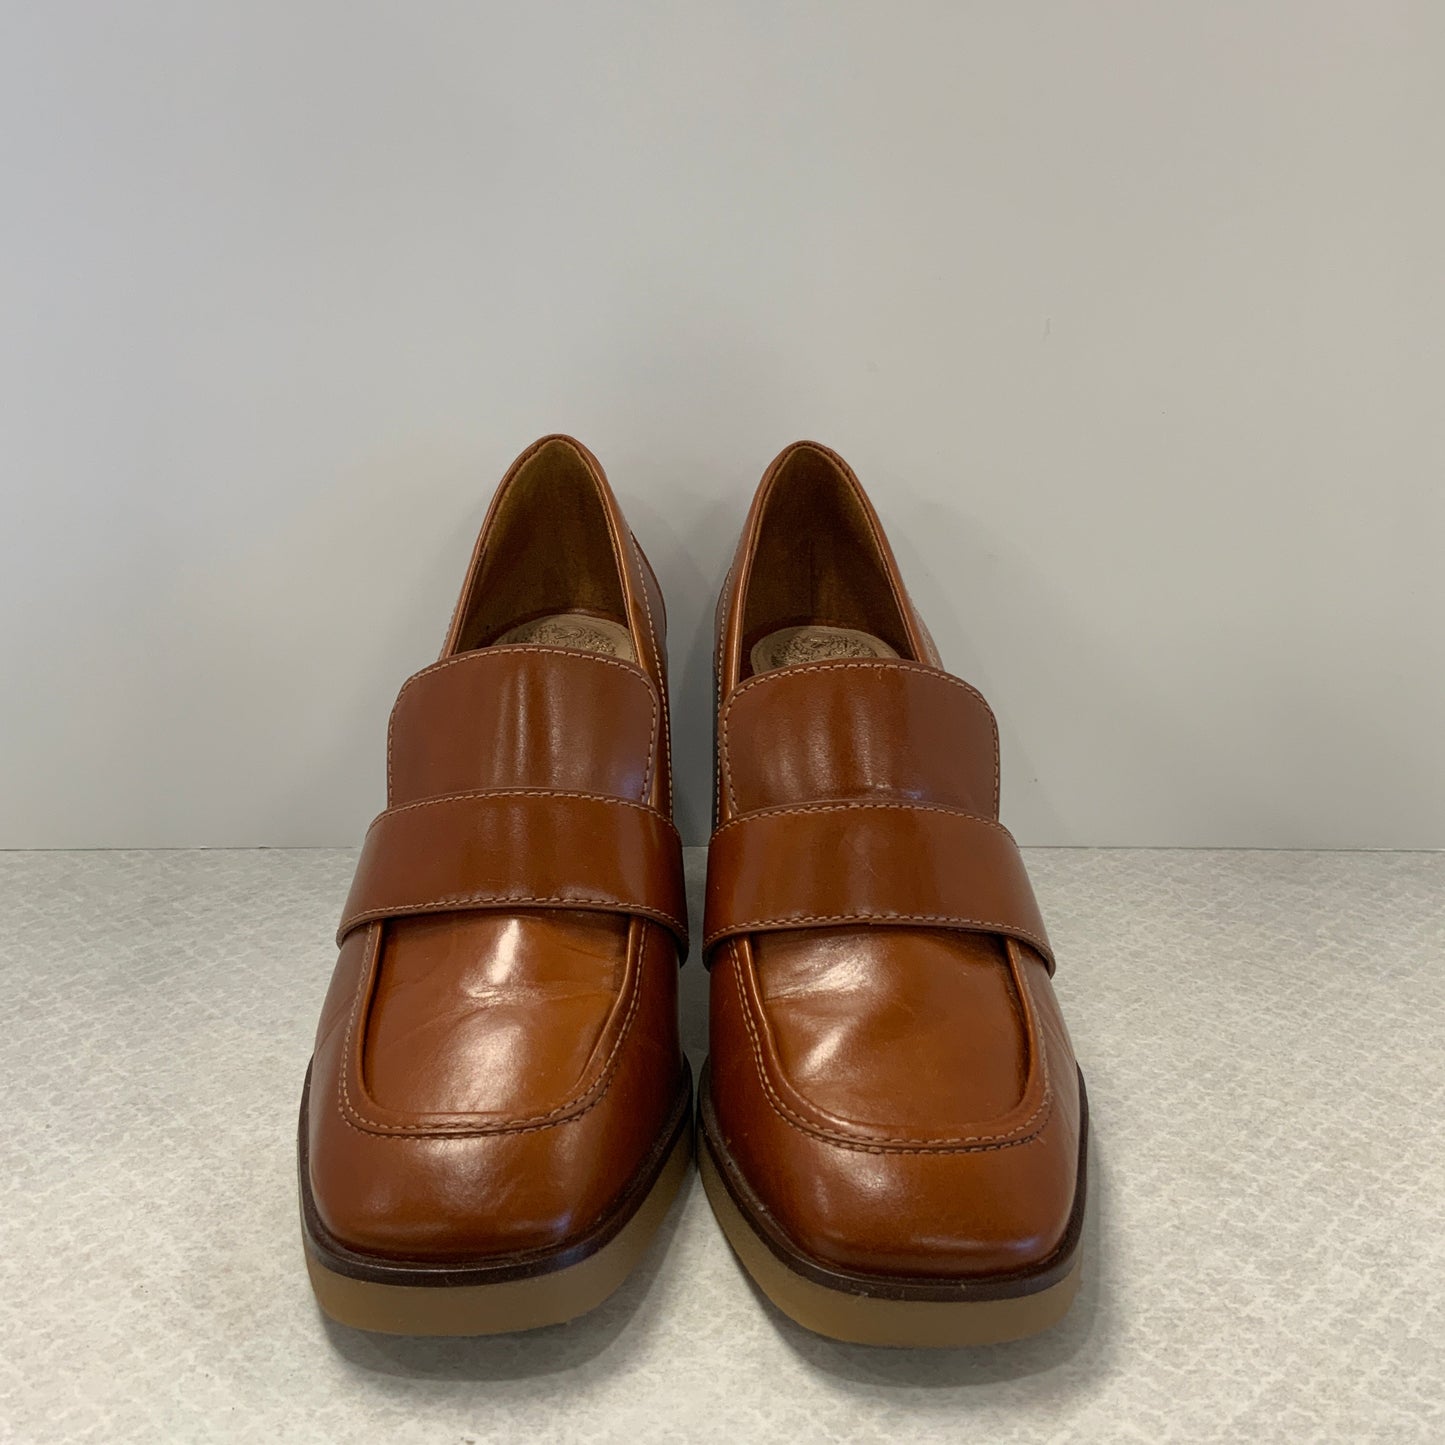 Brown Shoes Heels Block Vince Camuto, Size 8.5